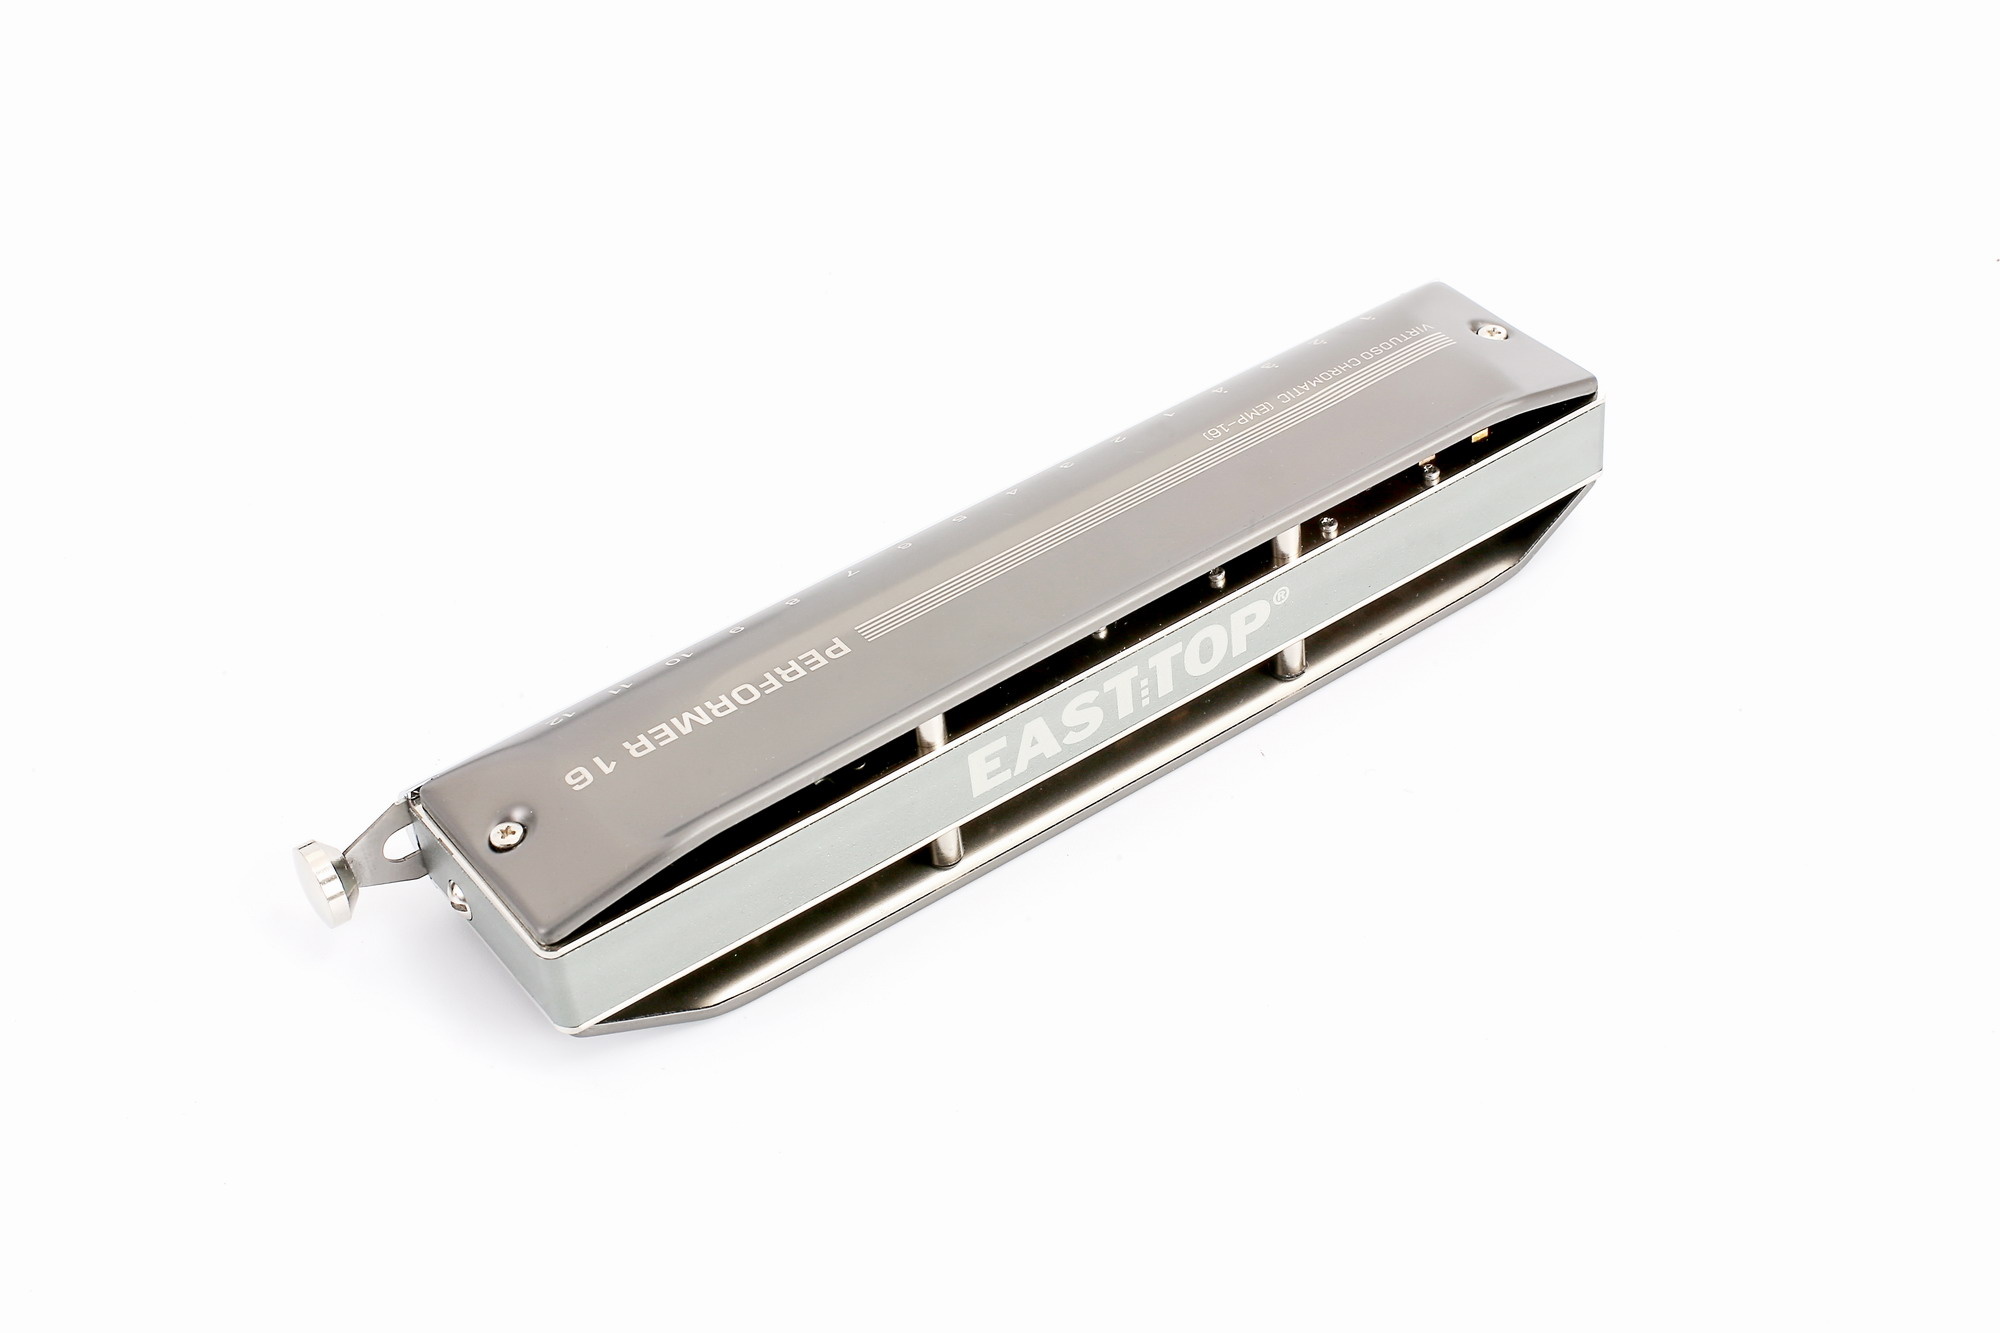 Harmonica: Chromatic Aluminum Comb,16-Hole Easttop "Performer 16", 64 Tone, Multi-Tone Sound, Pro Instrument, For Professional Players. 2000x1340 HD Wallpaper.